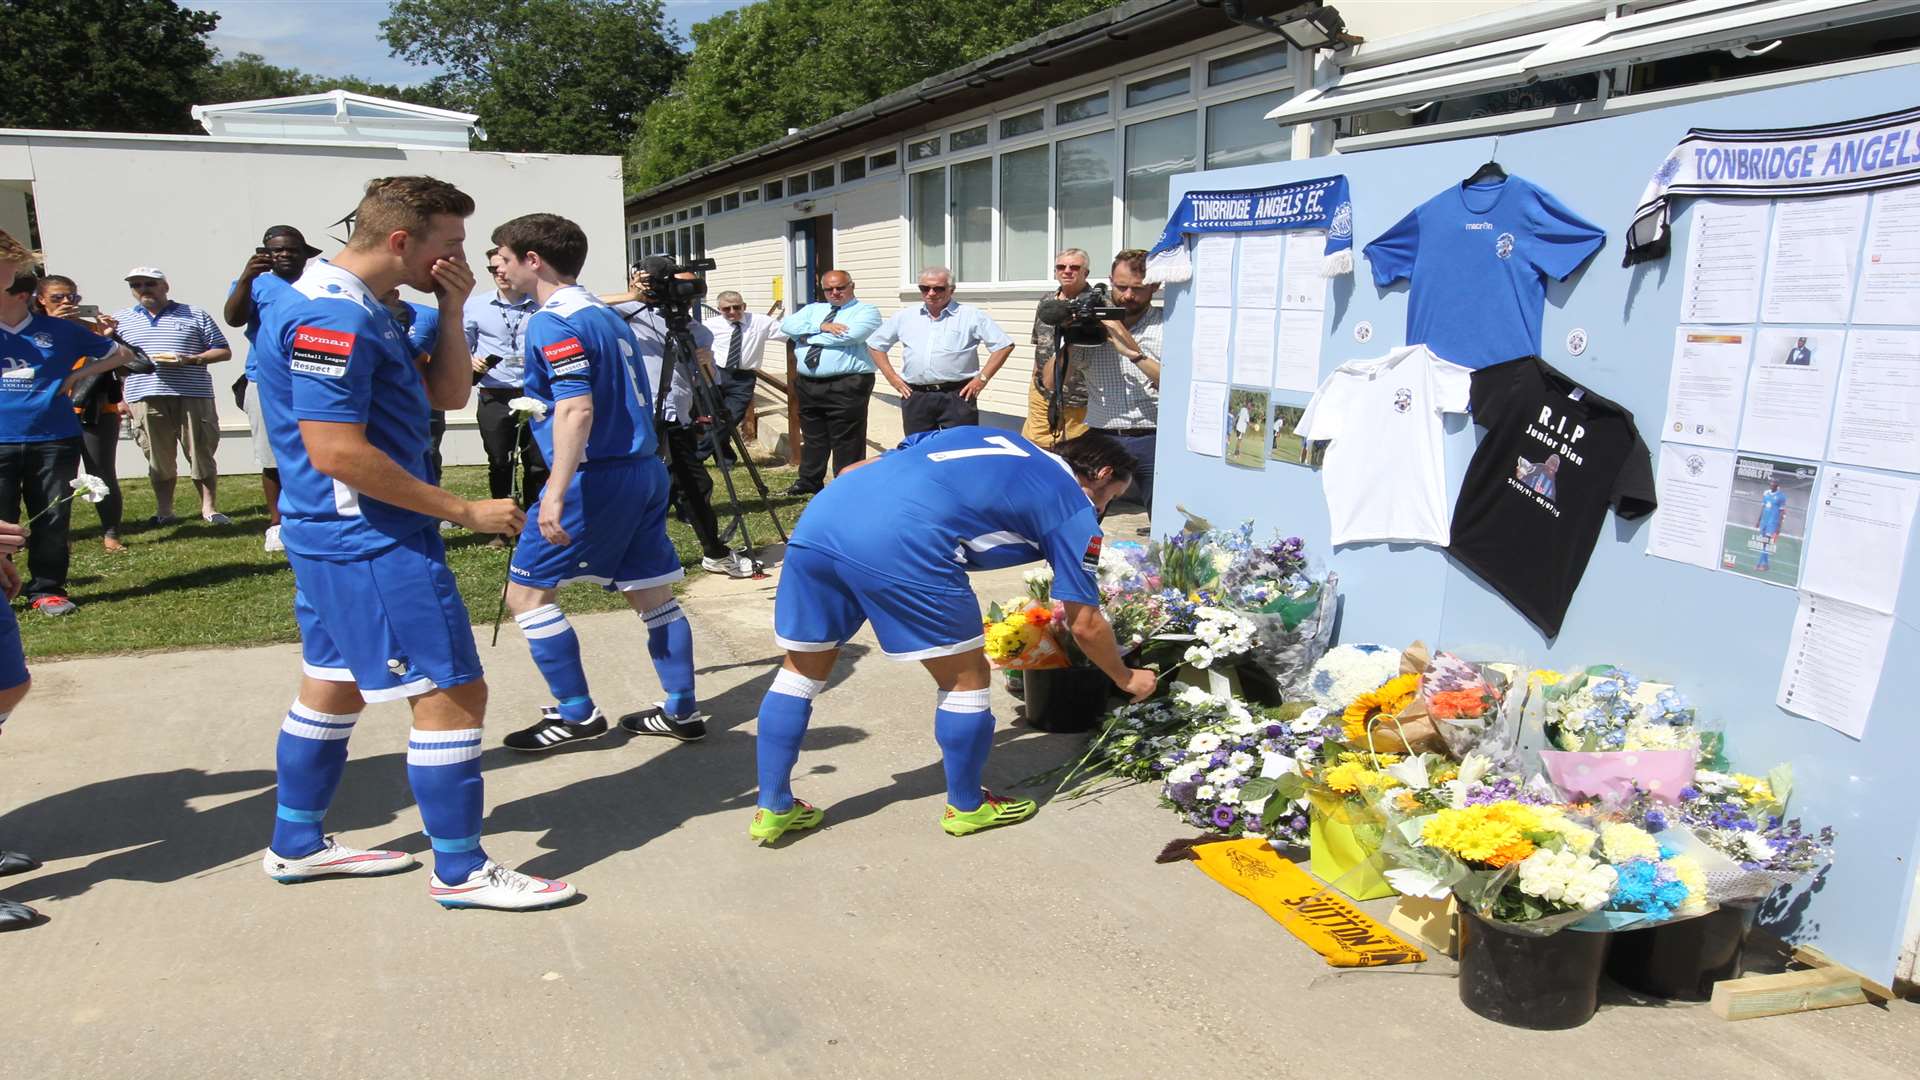 Tonbridge in blue and Gillingham in red pay their respects to Junior Dian